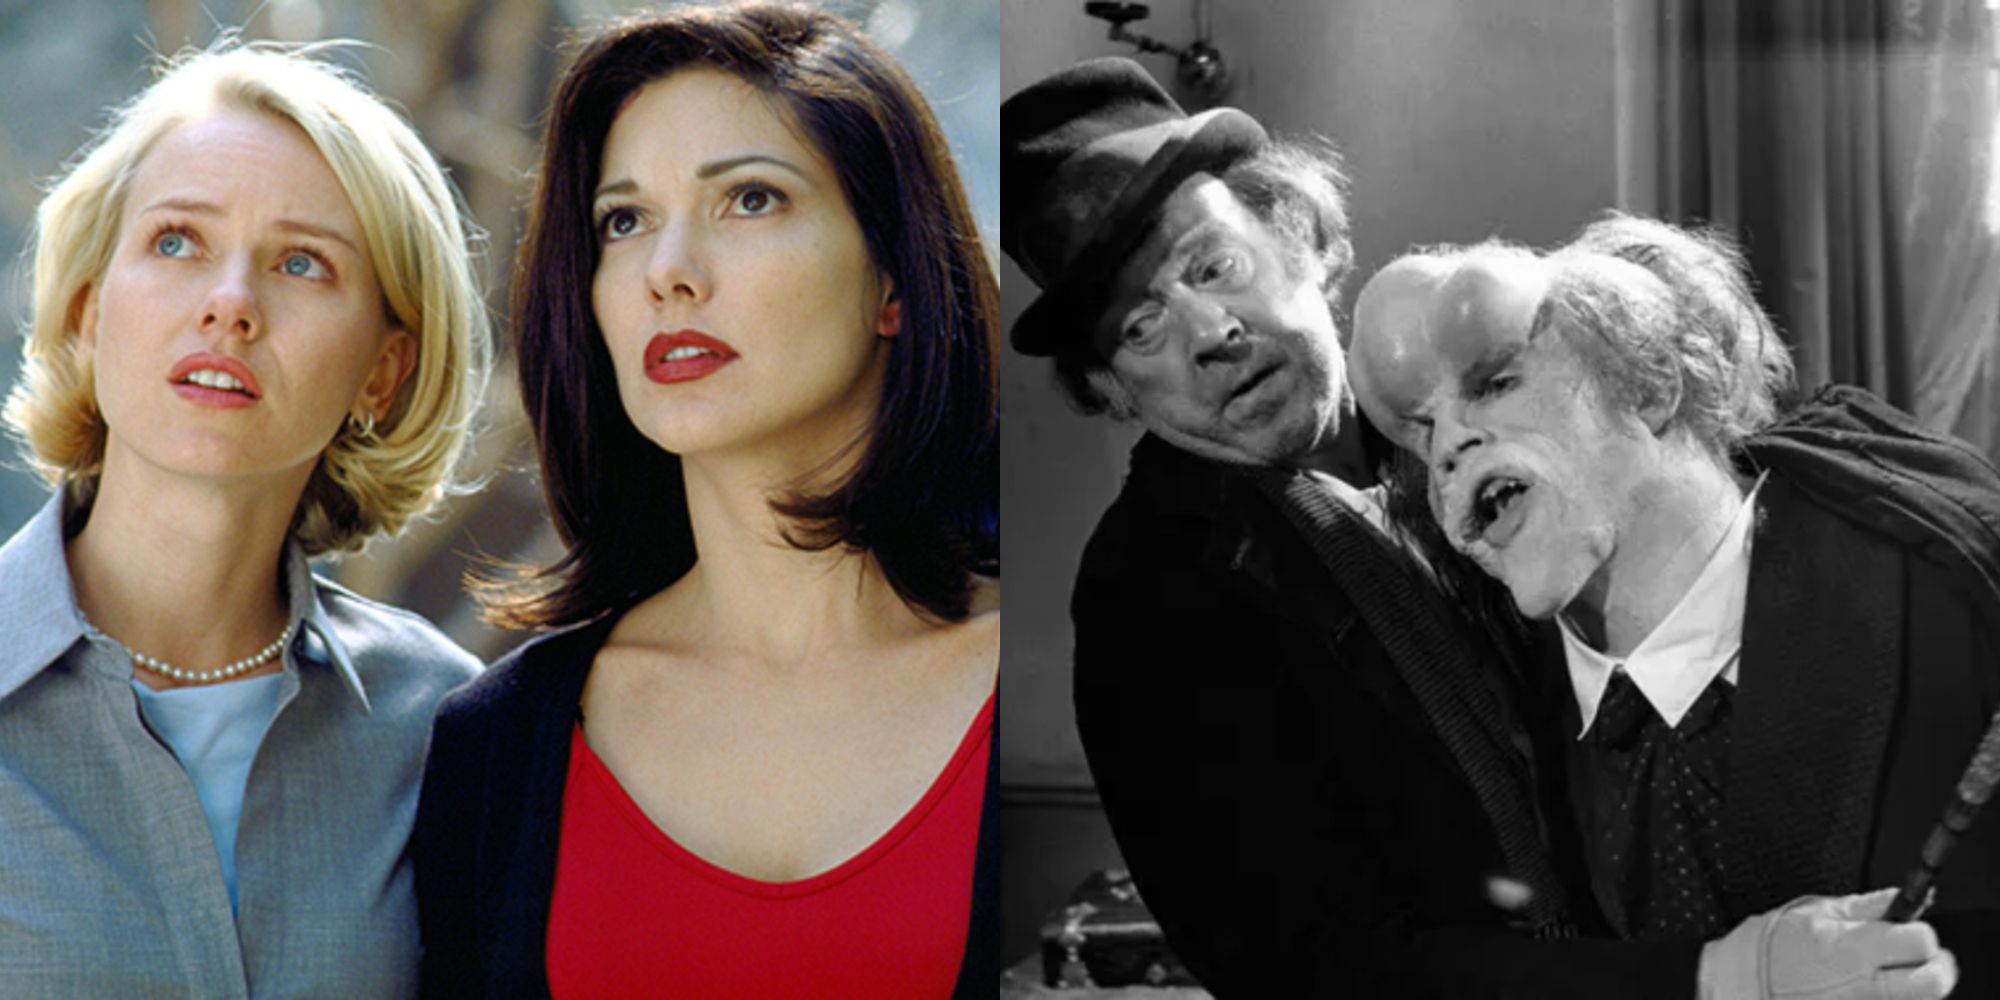 Split image showing characters from Mulholland Drive and The Elephant Man.